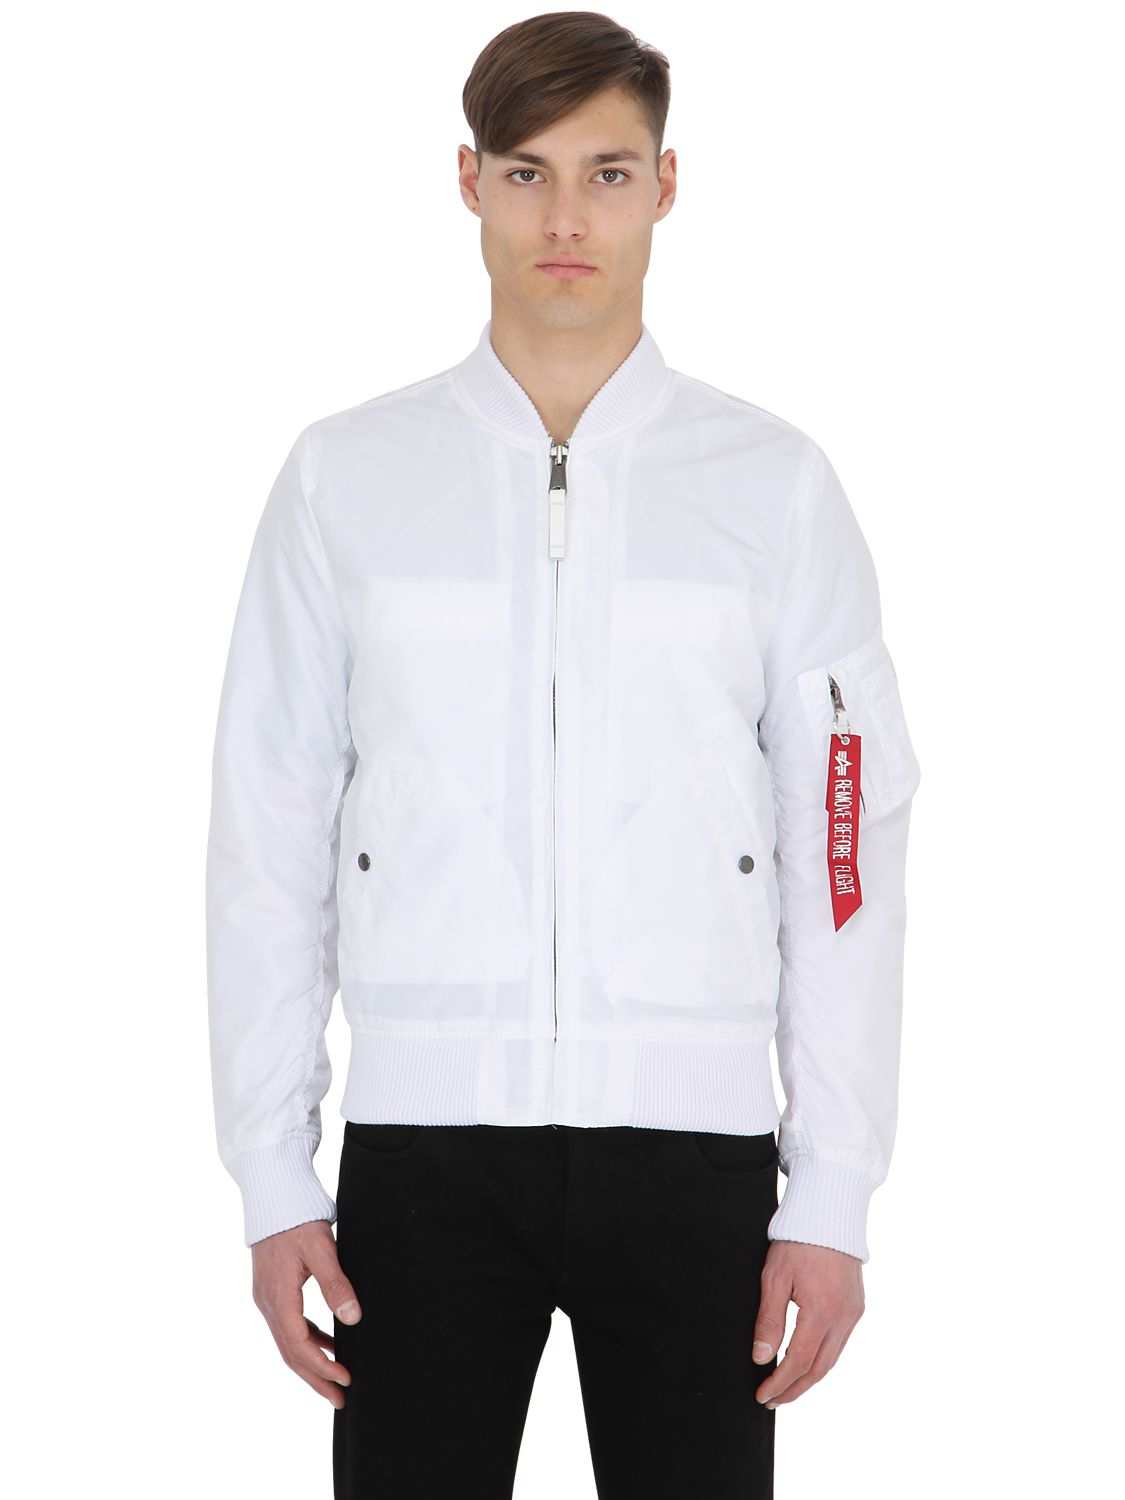 alpha-industries-white-ma-1-slim-fit-nylon-bomber-jacket-product-2-570276463-normal.jpeg